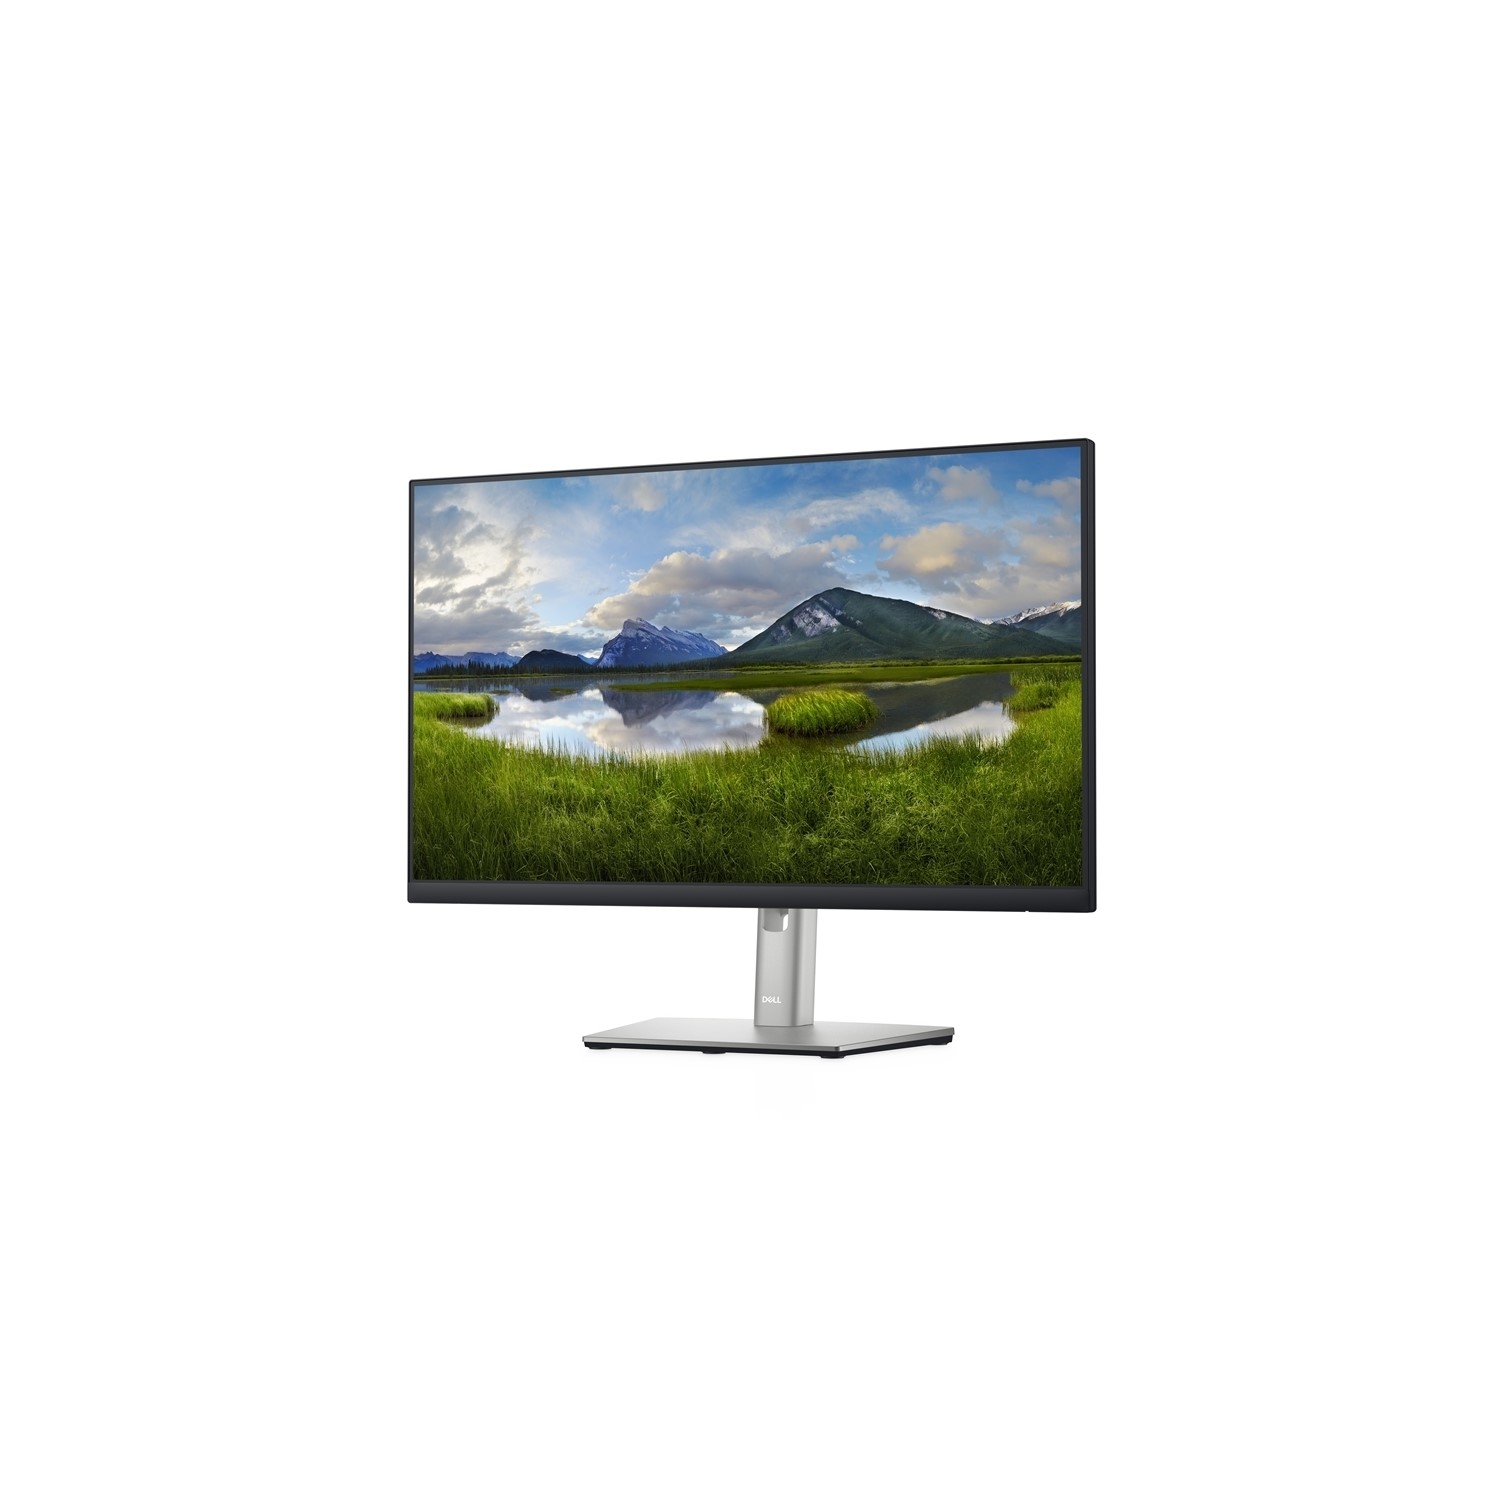 24 Monitor Deals - Laptops Direct